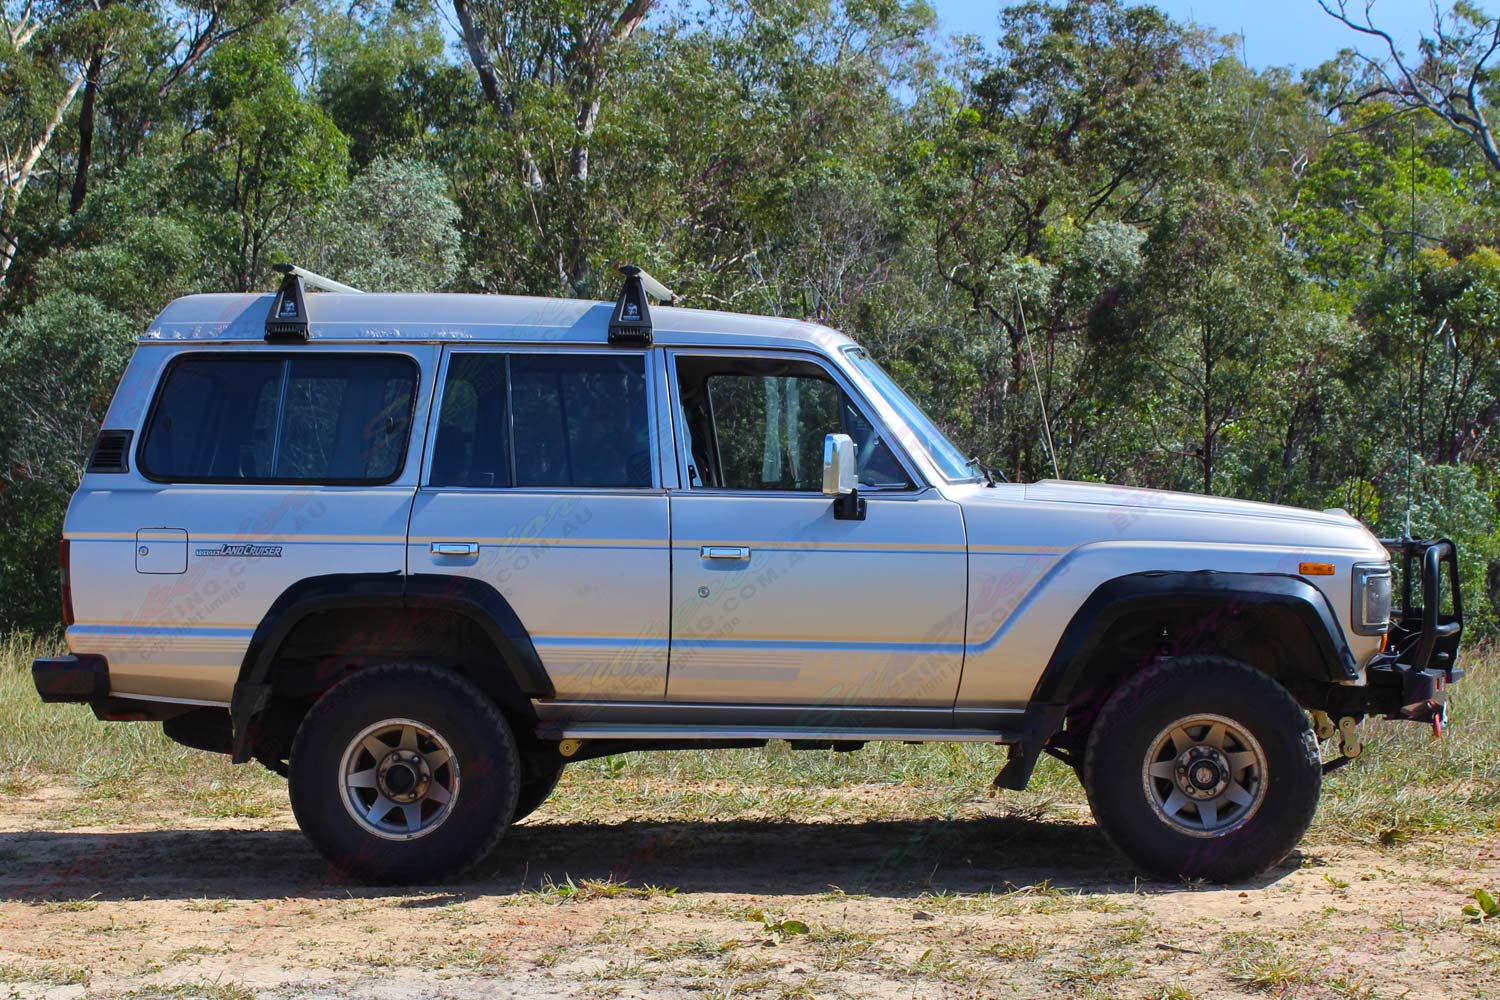 Right side view of a 60 Series Toyota Landcruiser fitted with a heavy duty EFS 2 Inch Lift Kit